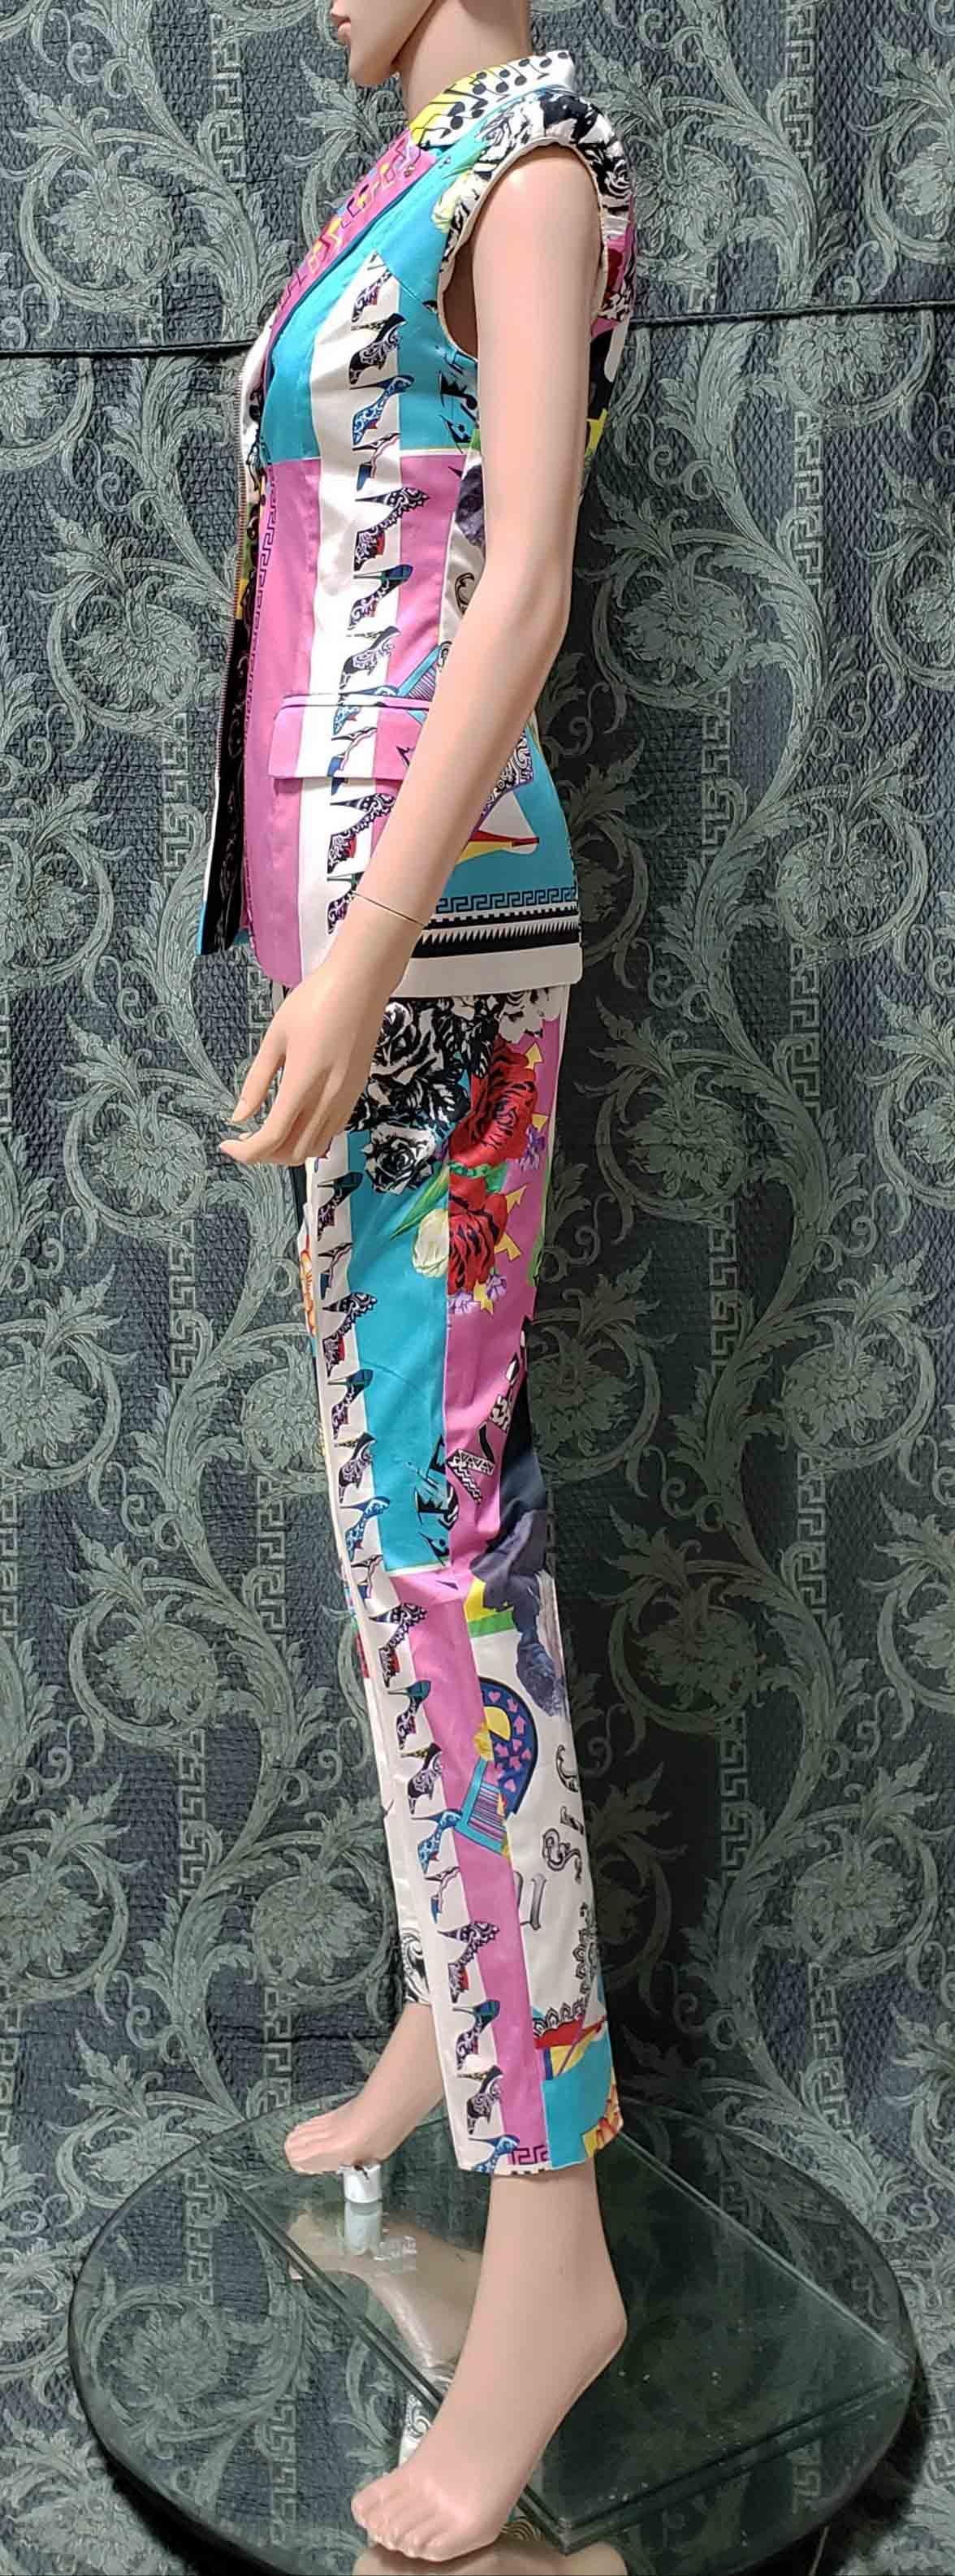 Resort 2013 Look # 4 NEW VERSACE ICONIC PRINT PANT SUIT 38 - 2  For Sale 1